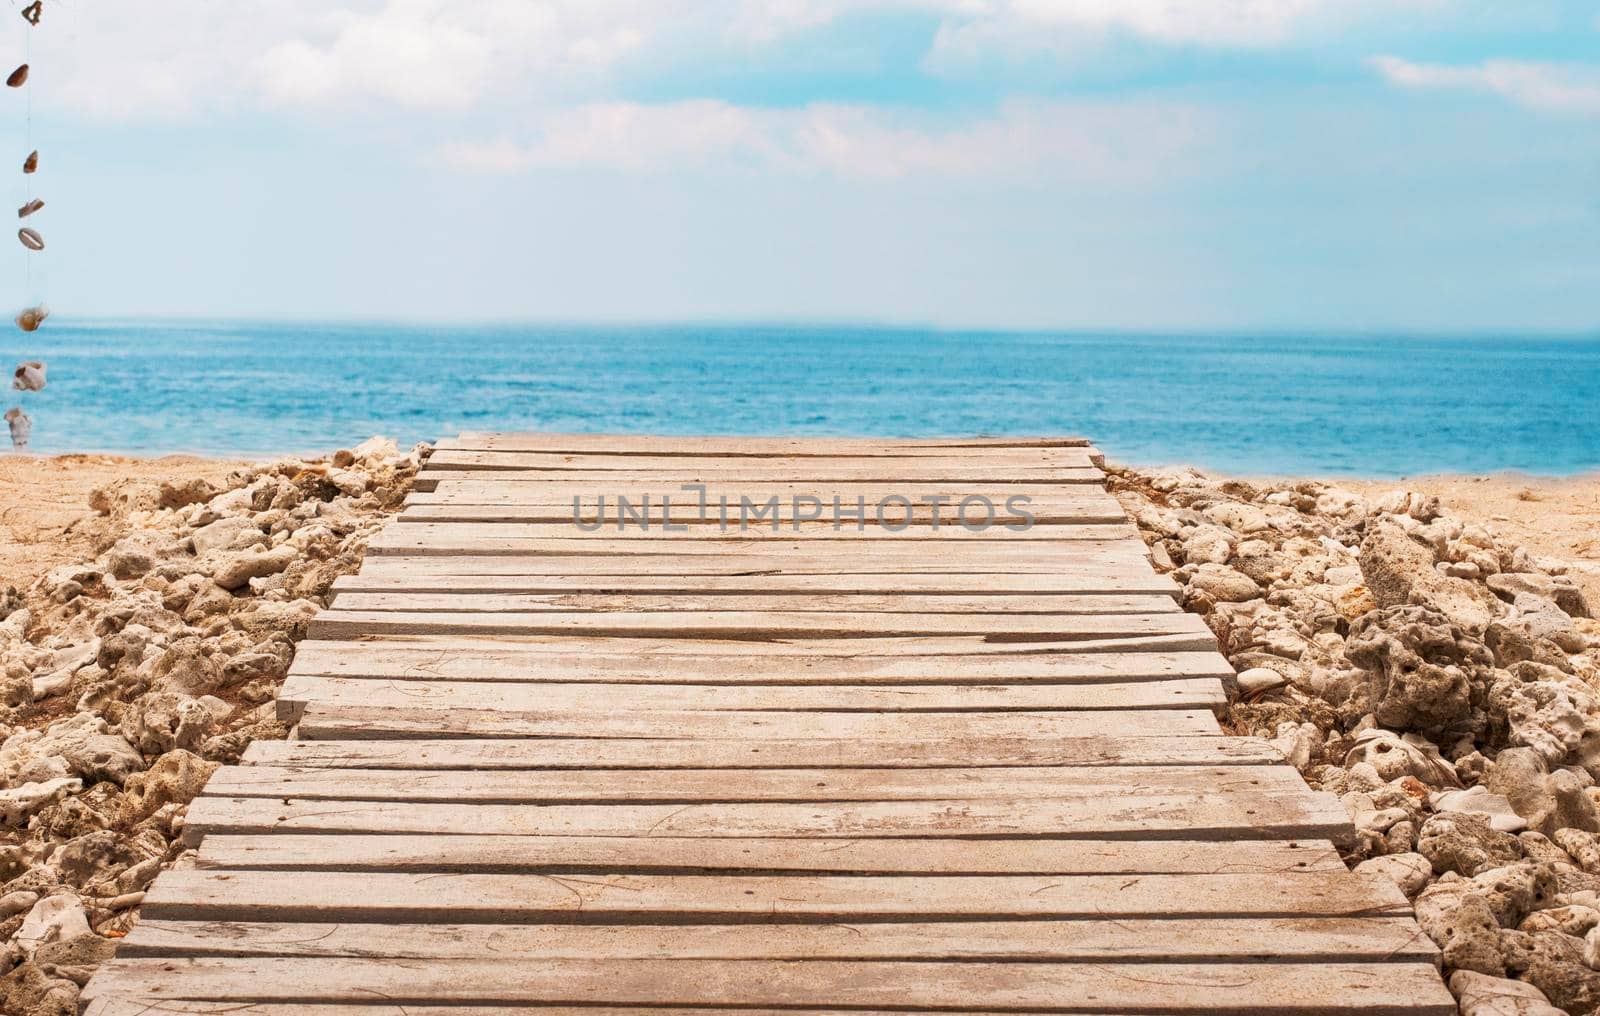 Wooden platform on beach with seascape and cloudy sky